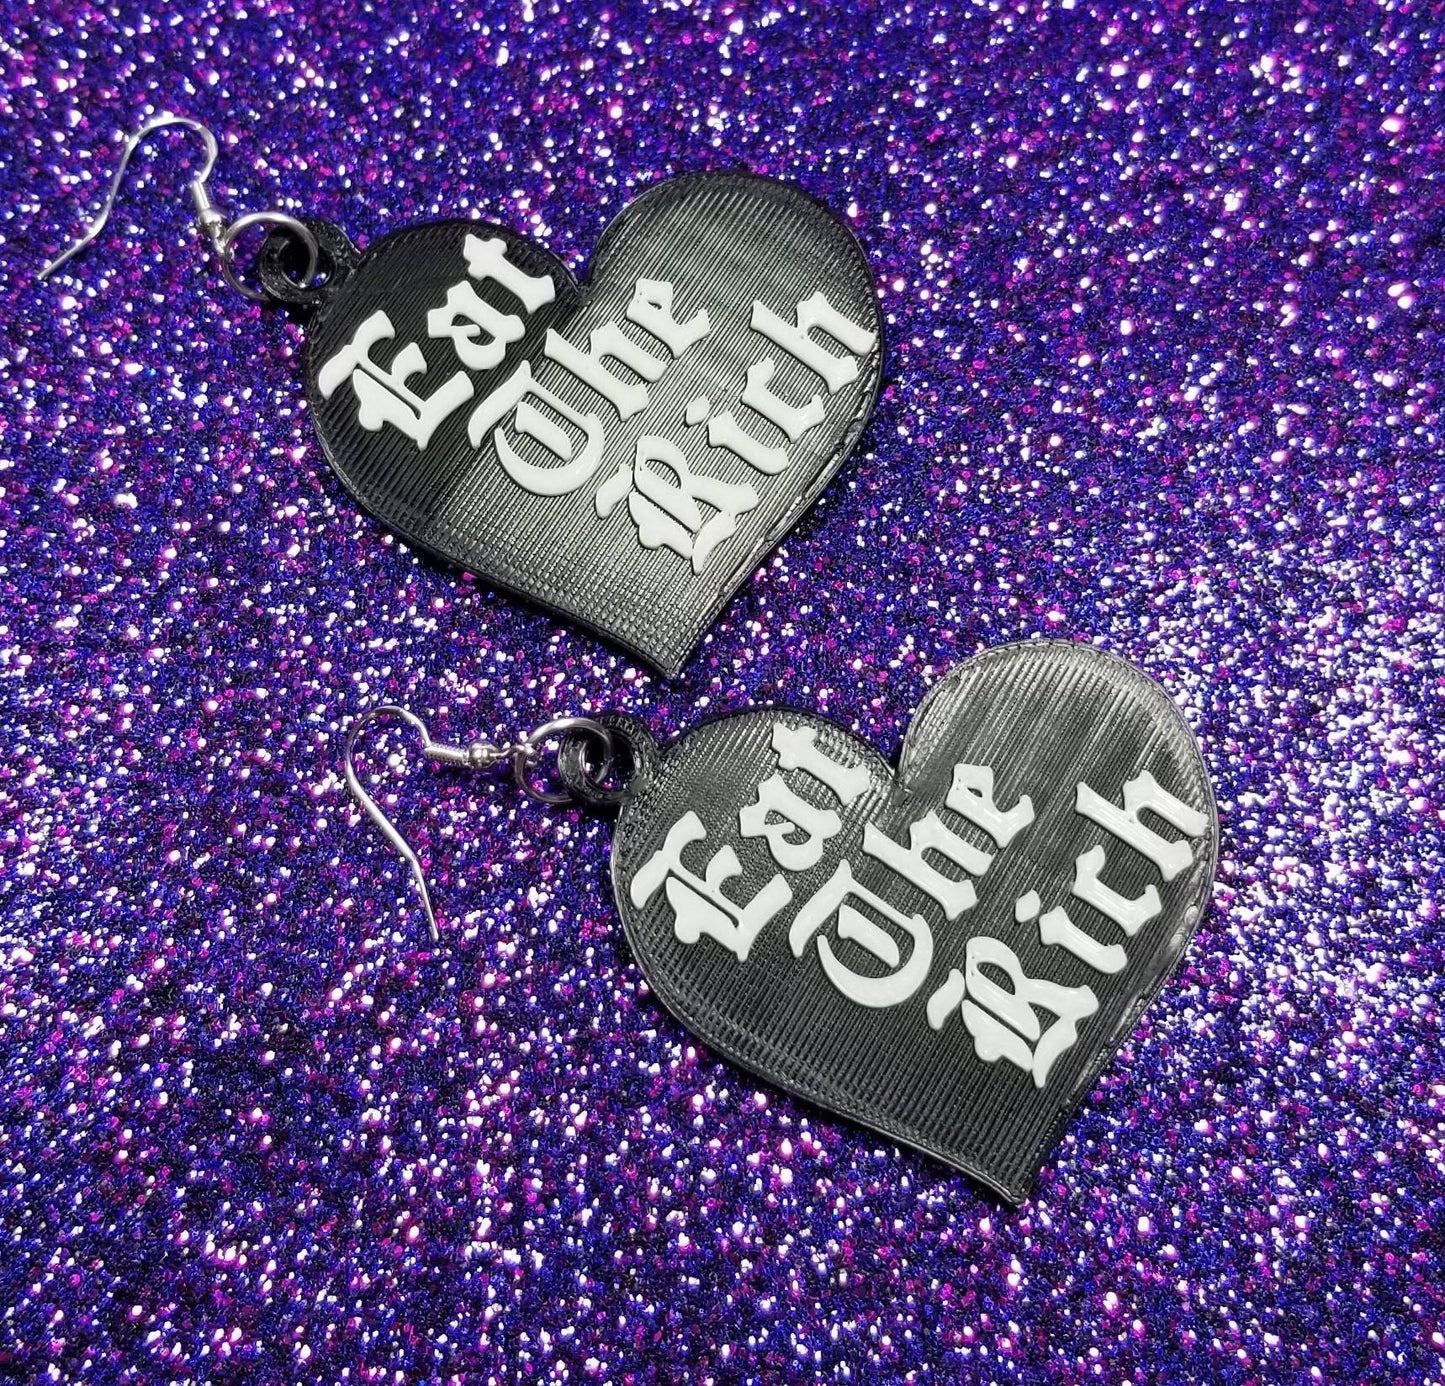 Eat The Rich Heart Statement Earrings 3D Printed